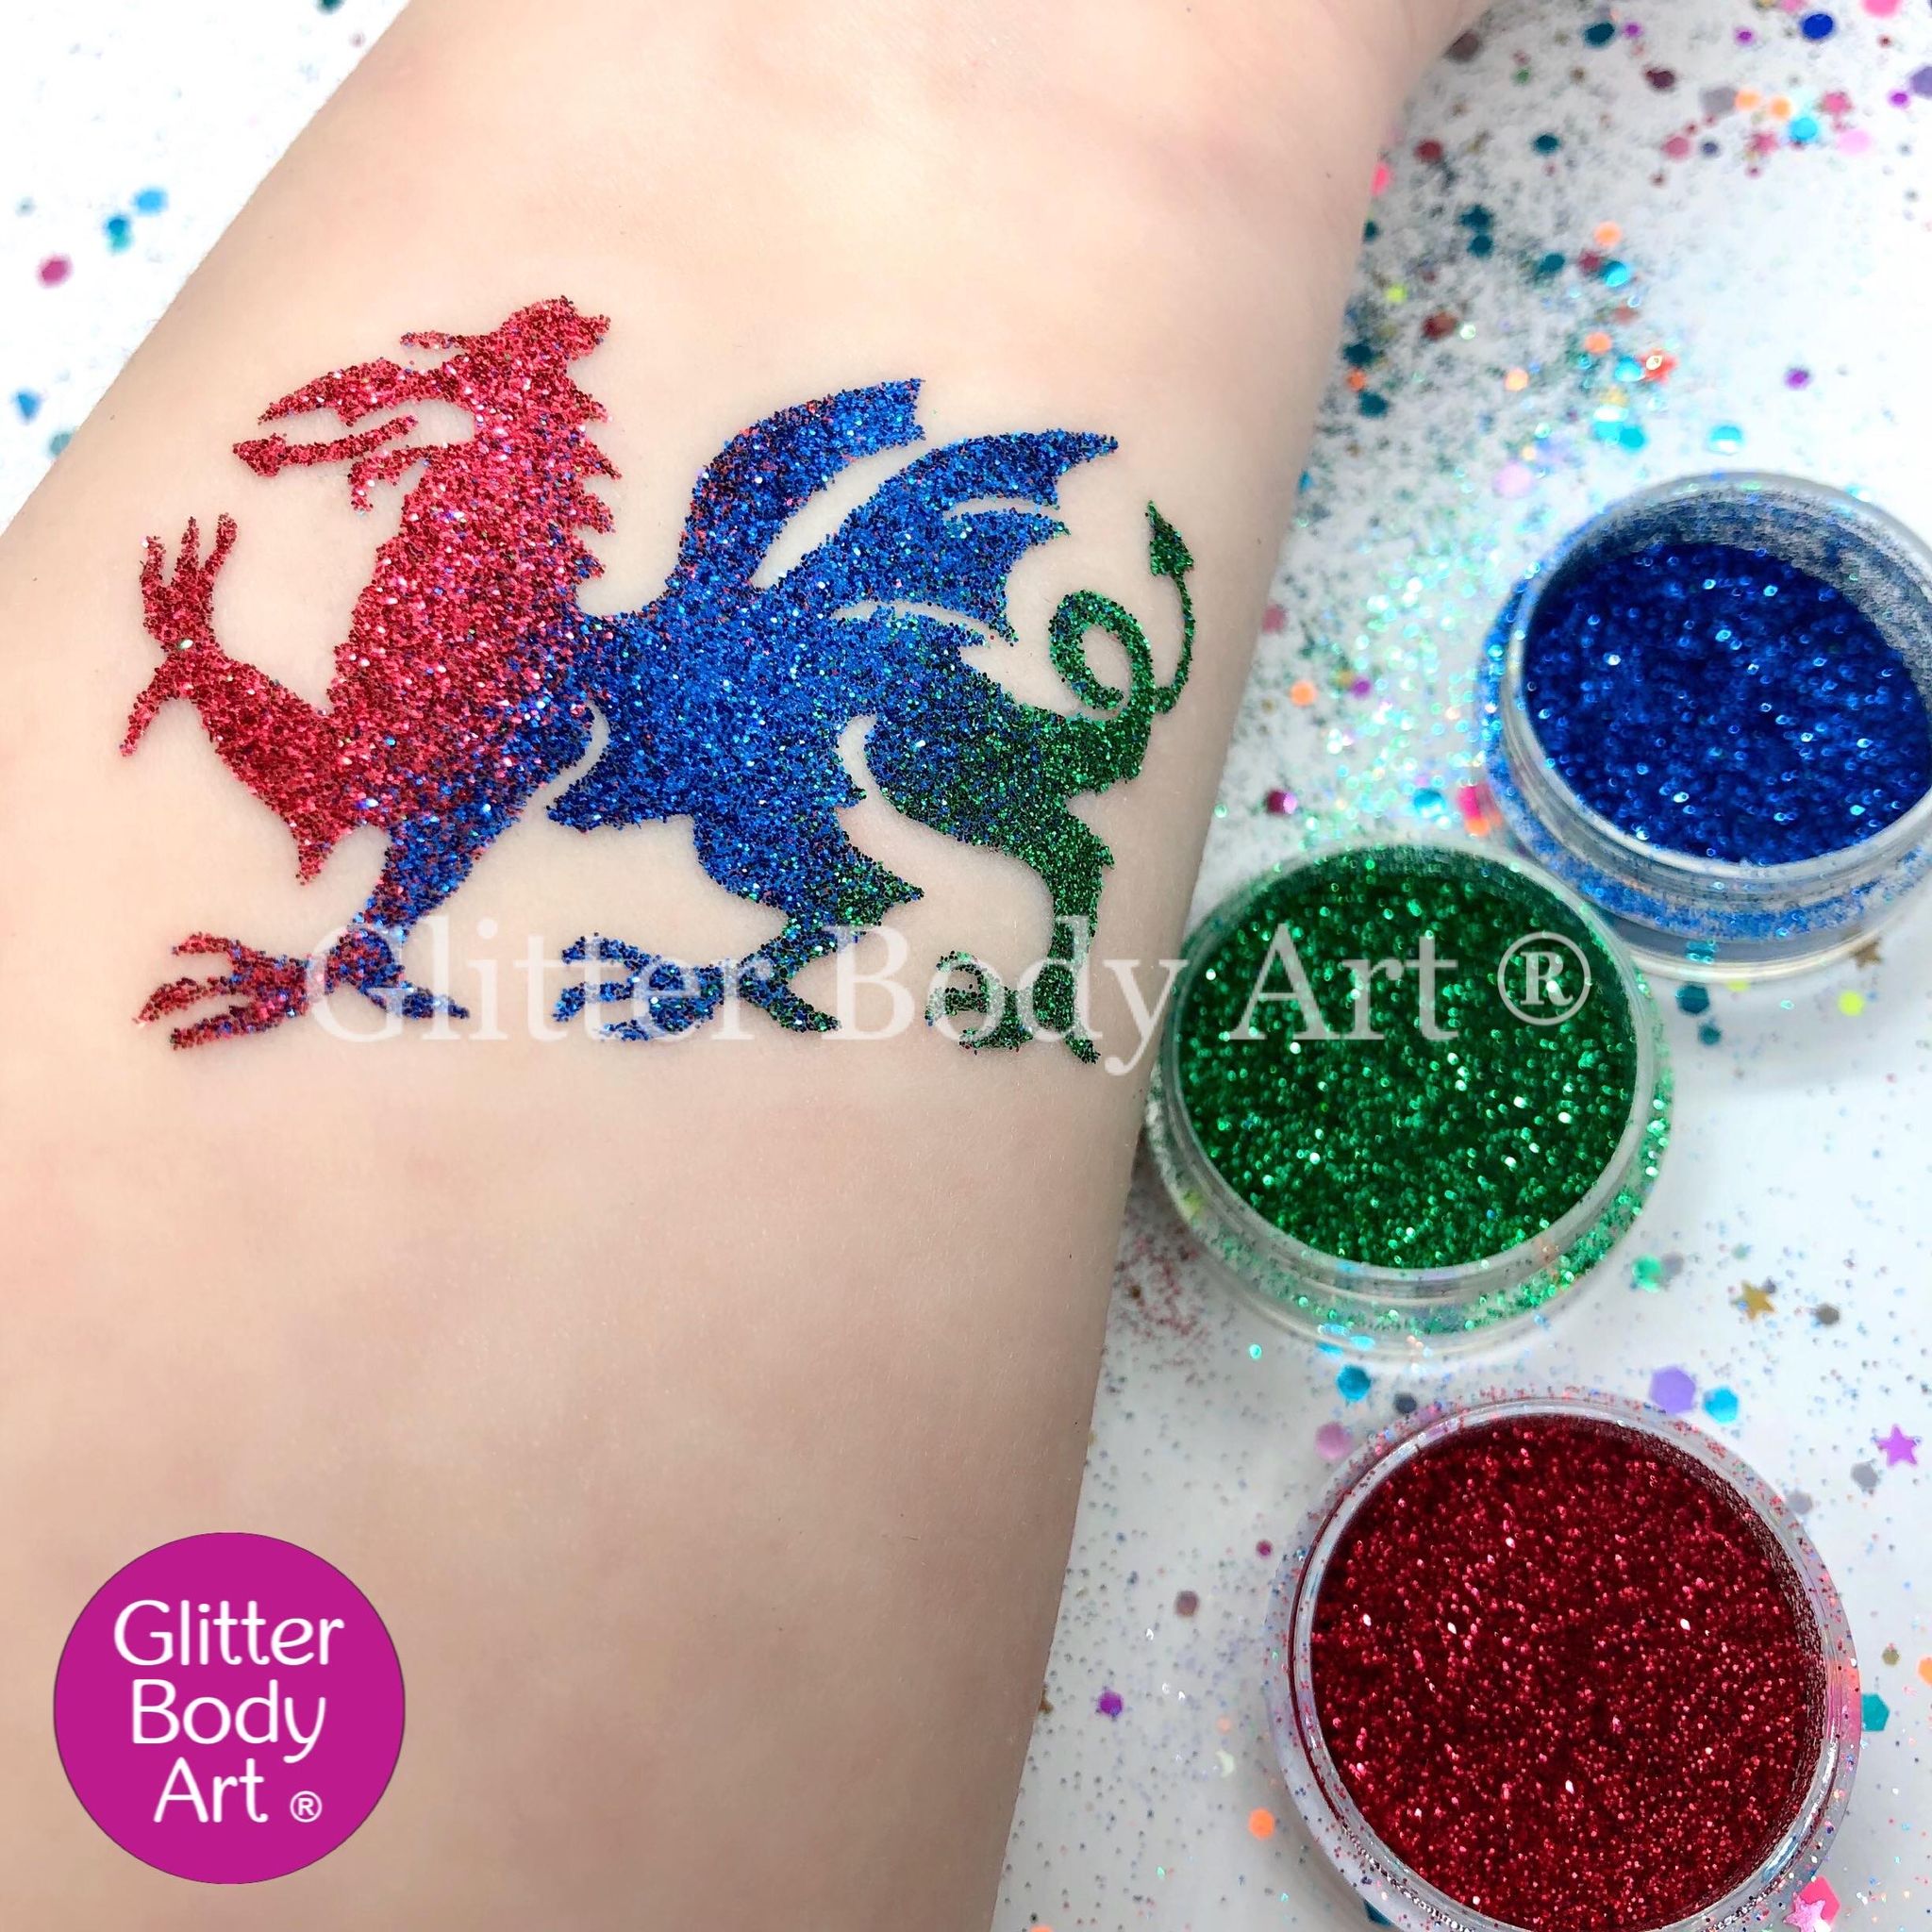 Wales Face Painting Kit with Stencils - Temporary Tattoo Store